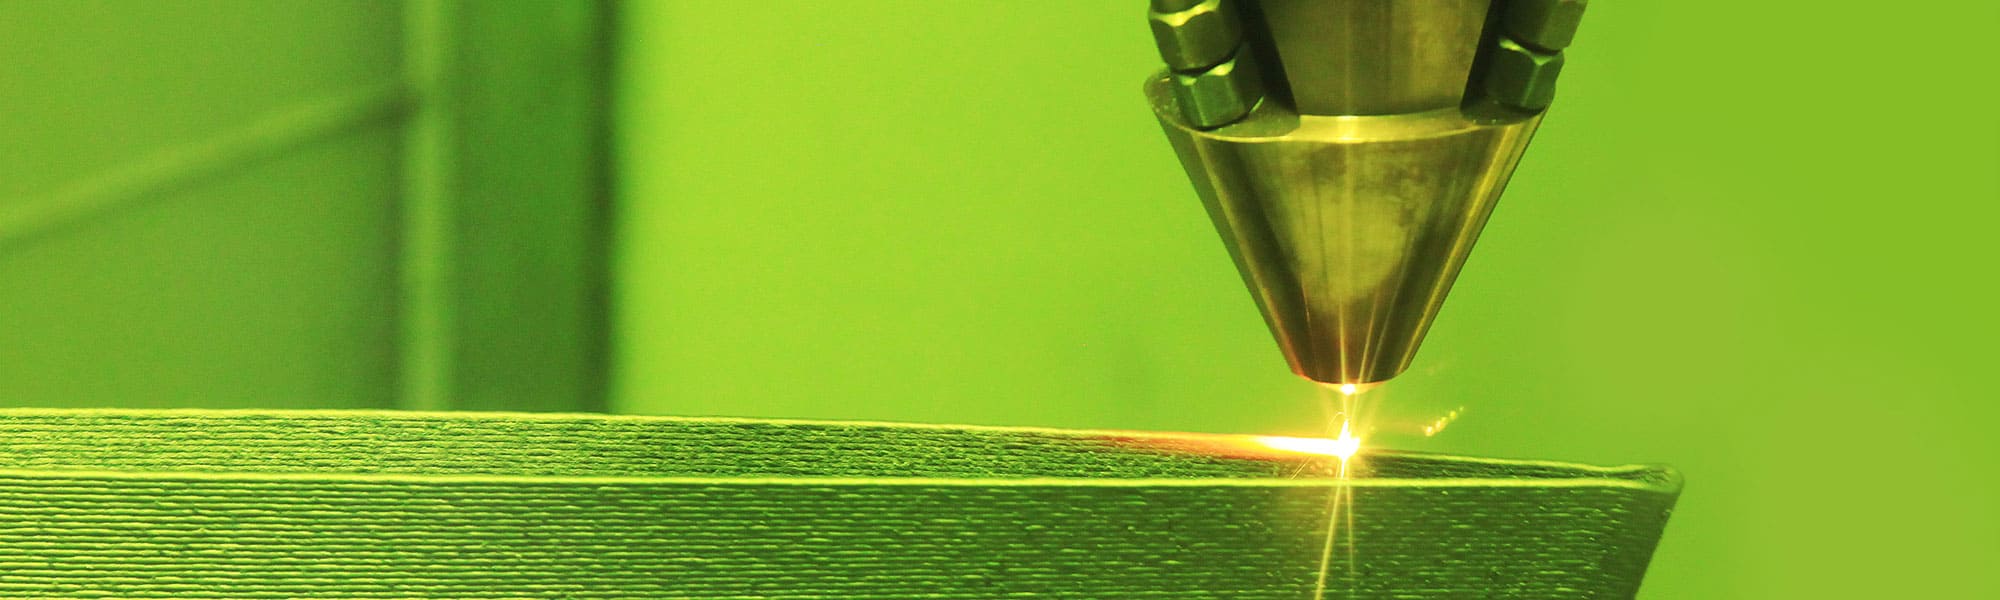 Fiber optic solutions for power lasers